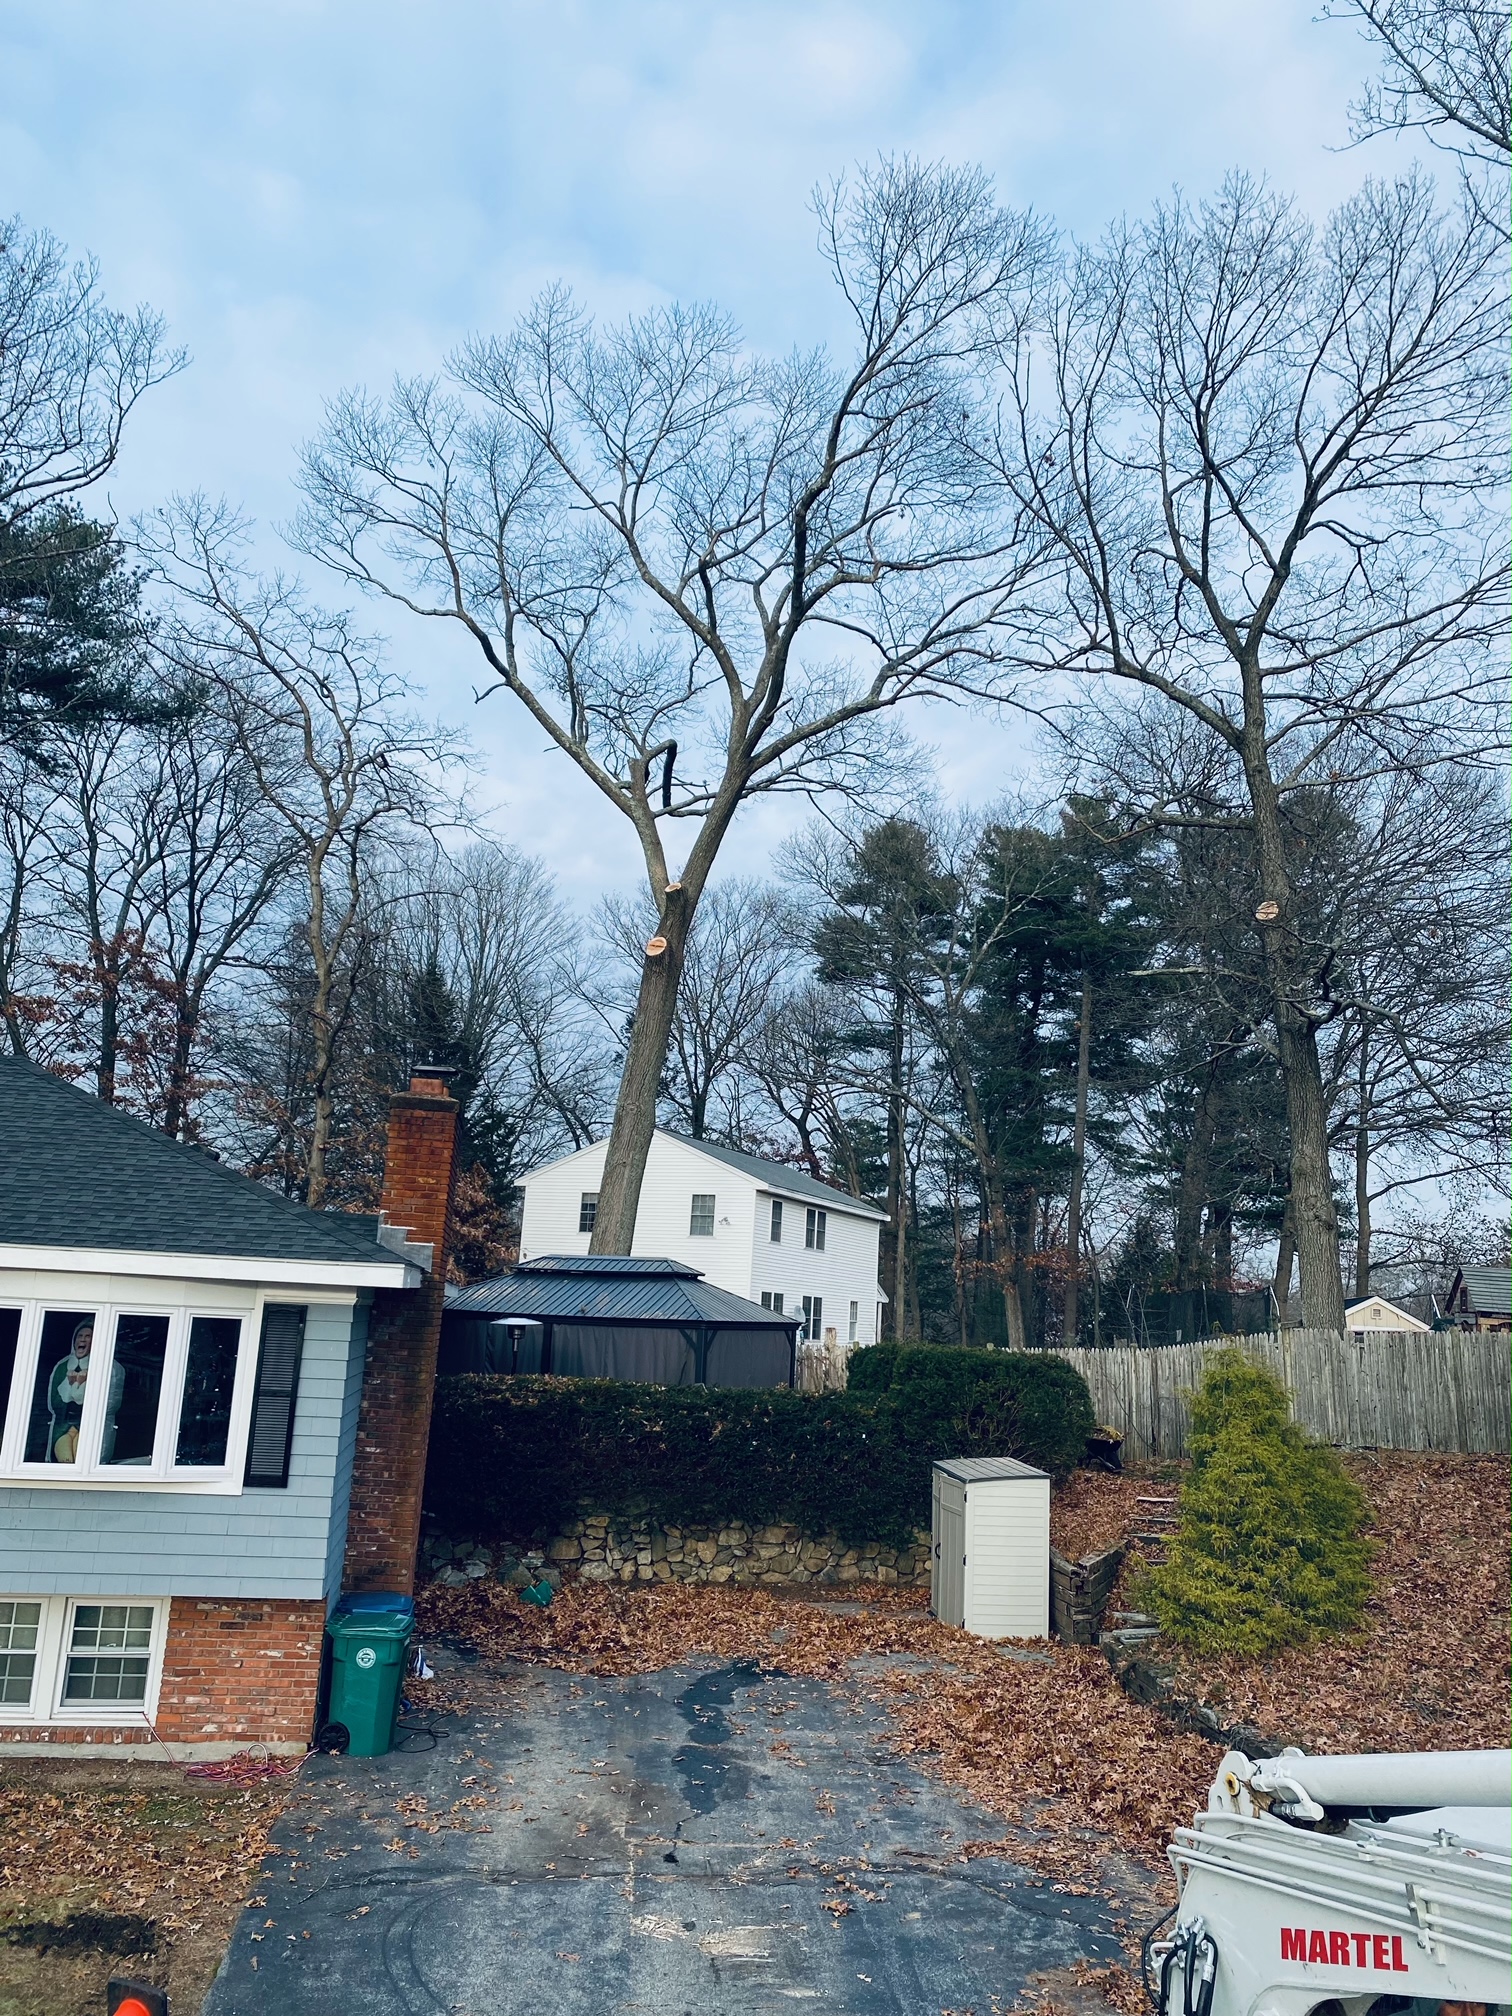 The crew trimmed some large trees to protect the yard for this property in Billerica, MA.